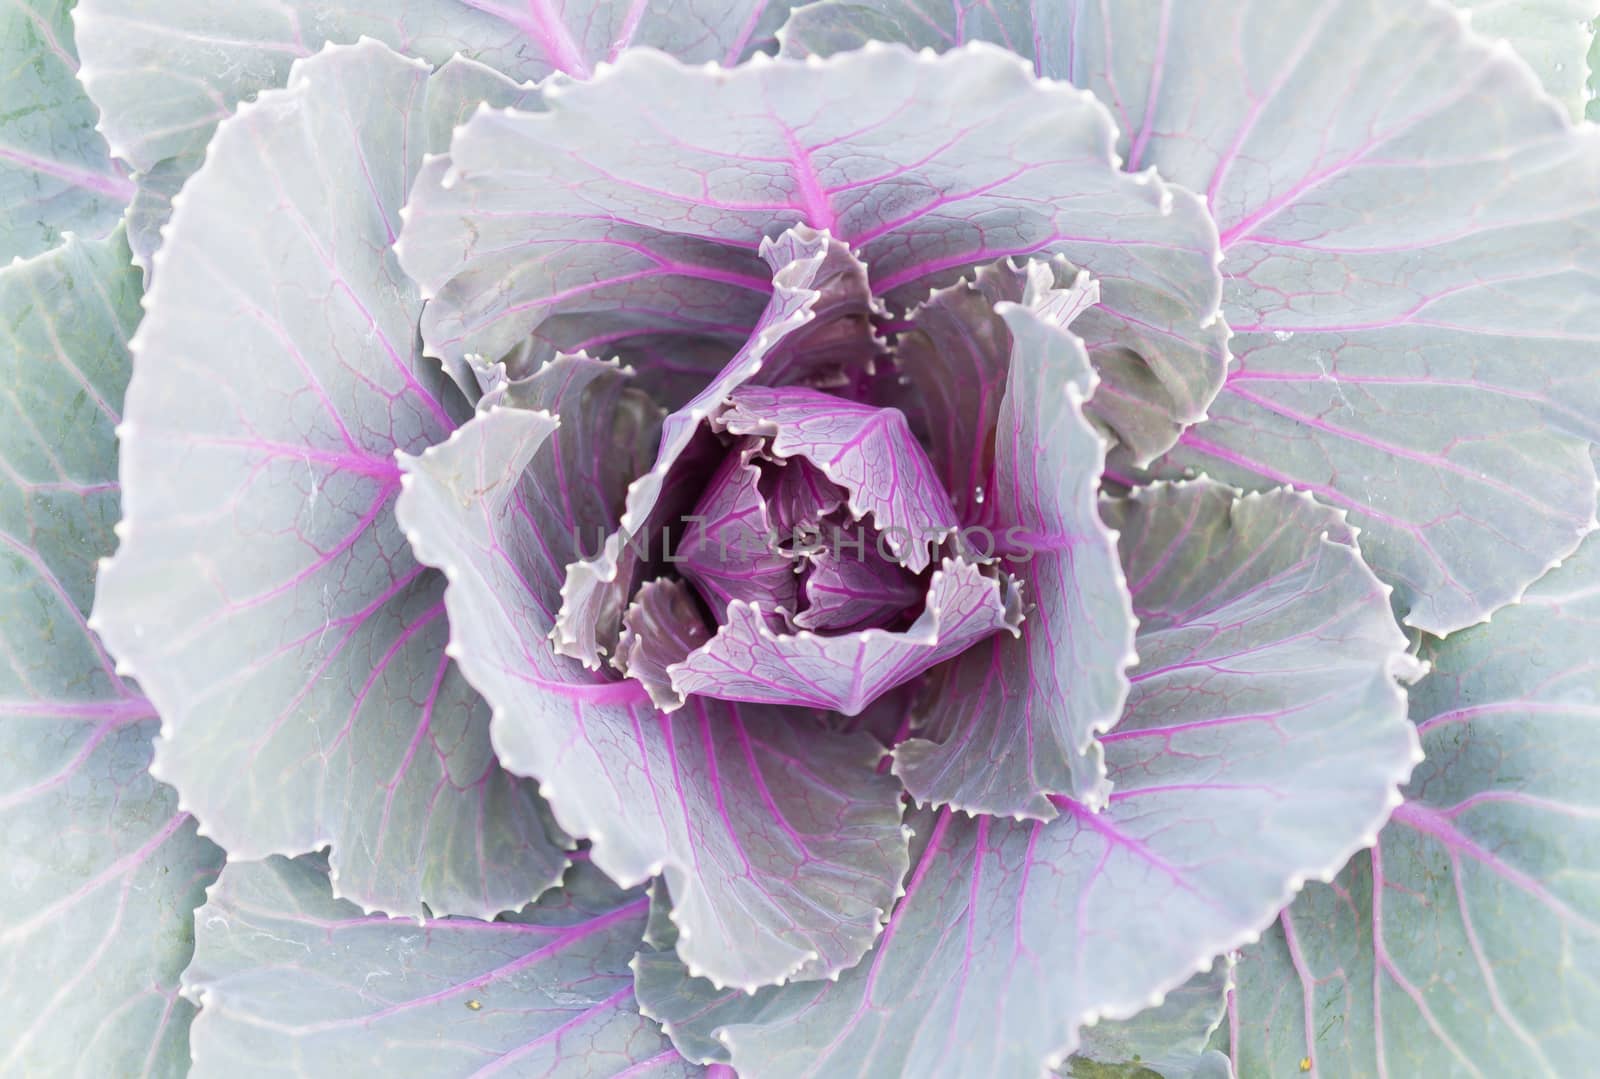 Purple or Violet Cabbages or Kale for Decoration by steafpong